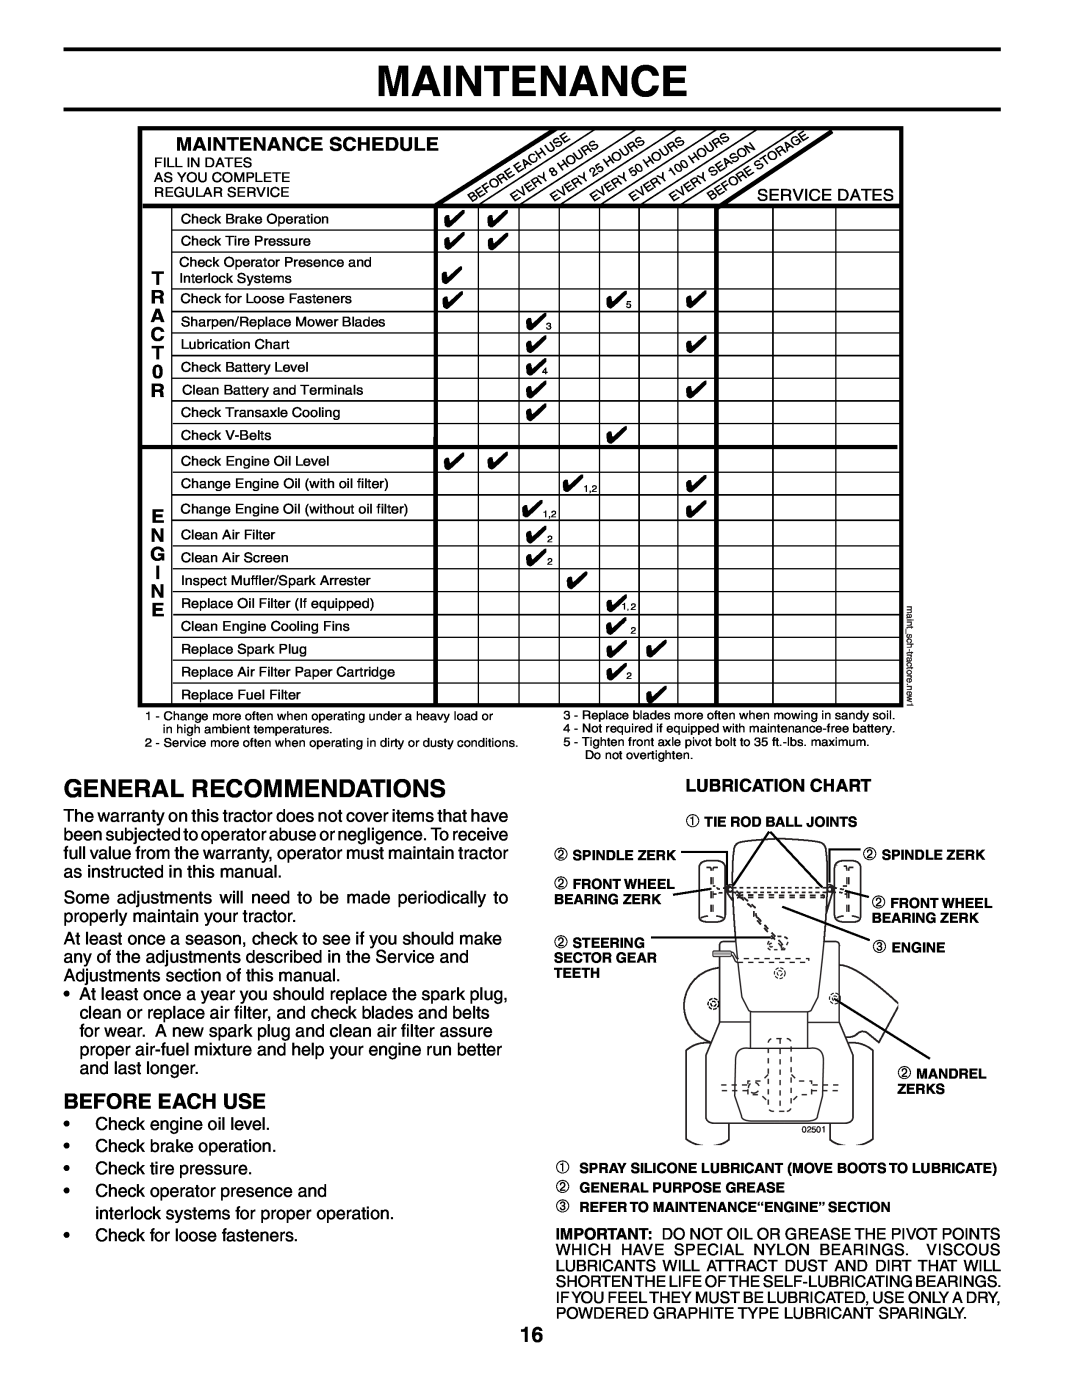 Poulan PDGT26H48C owner manual General Recommendations, Before Each Use, Maintenance Schedule 